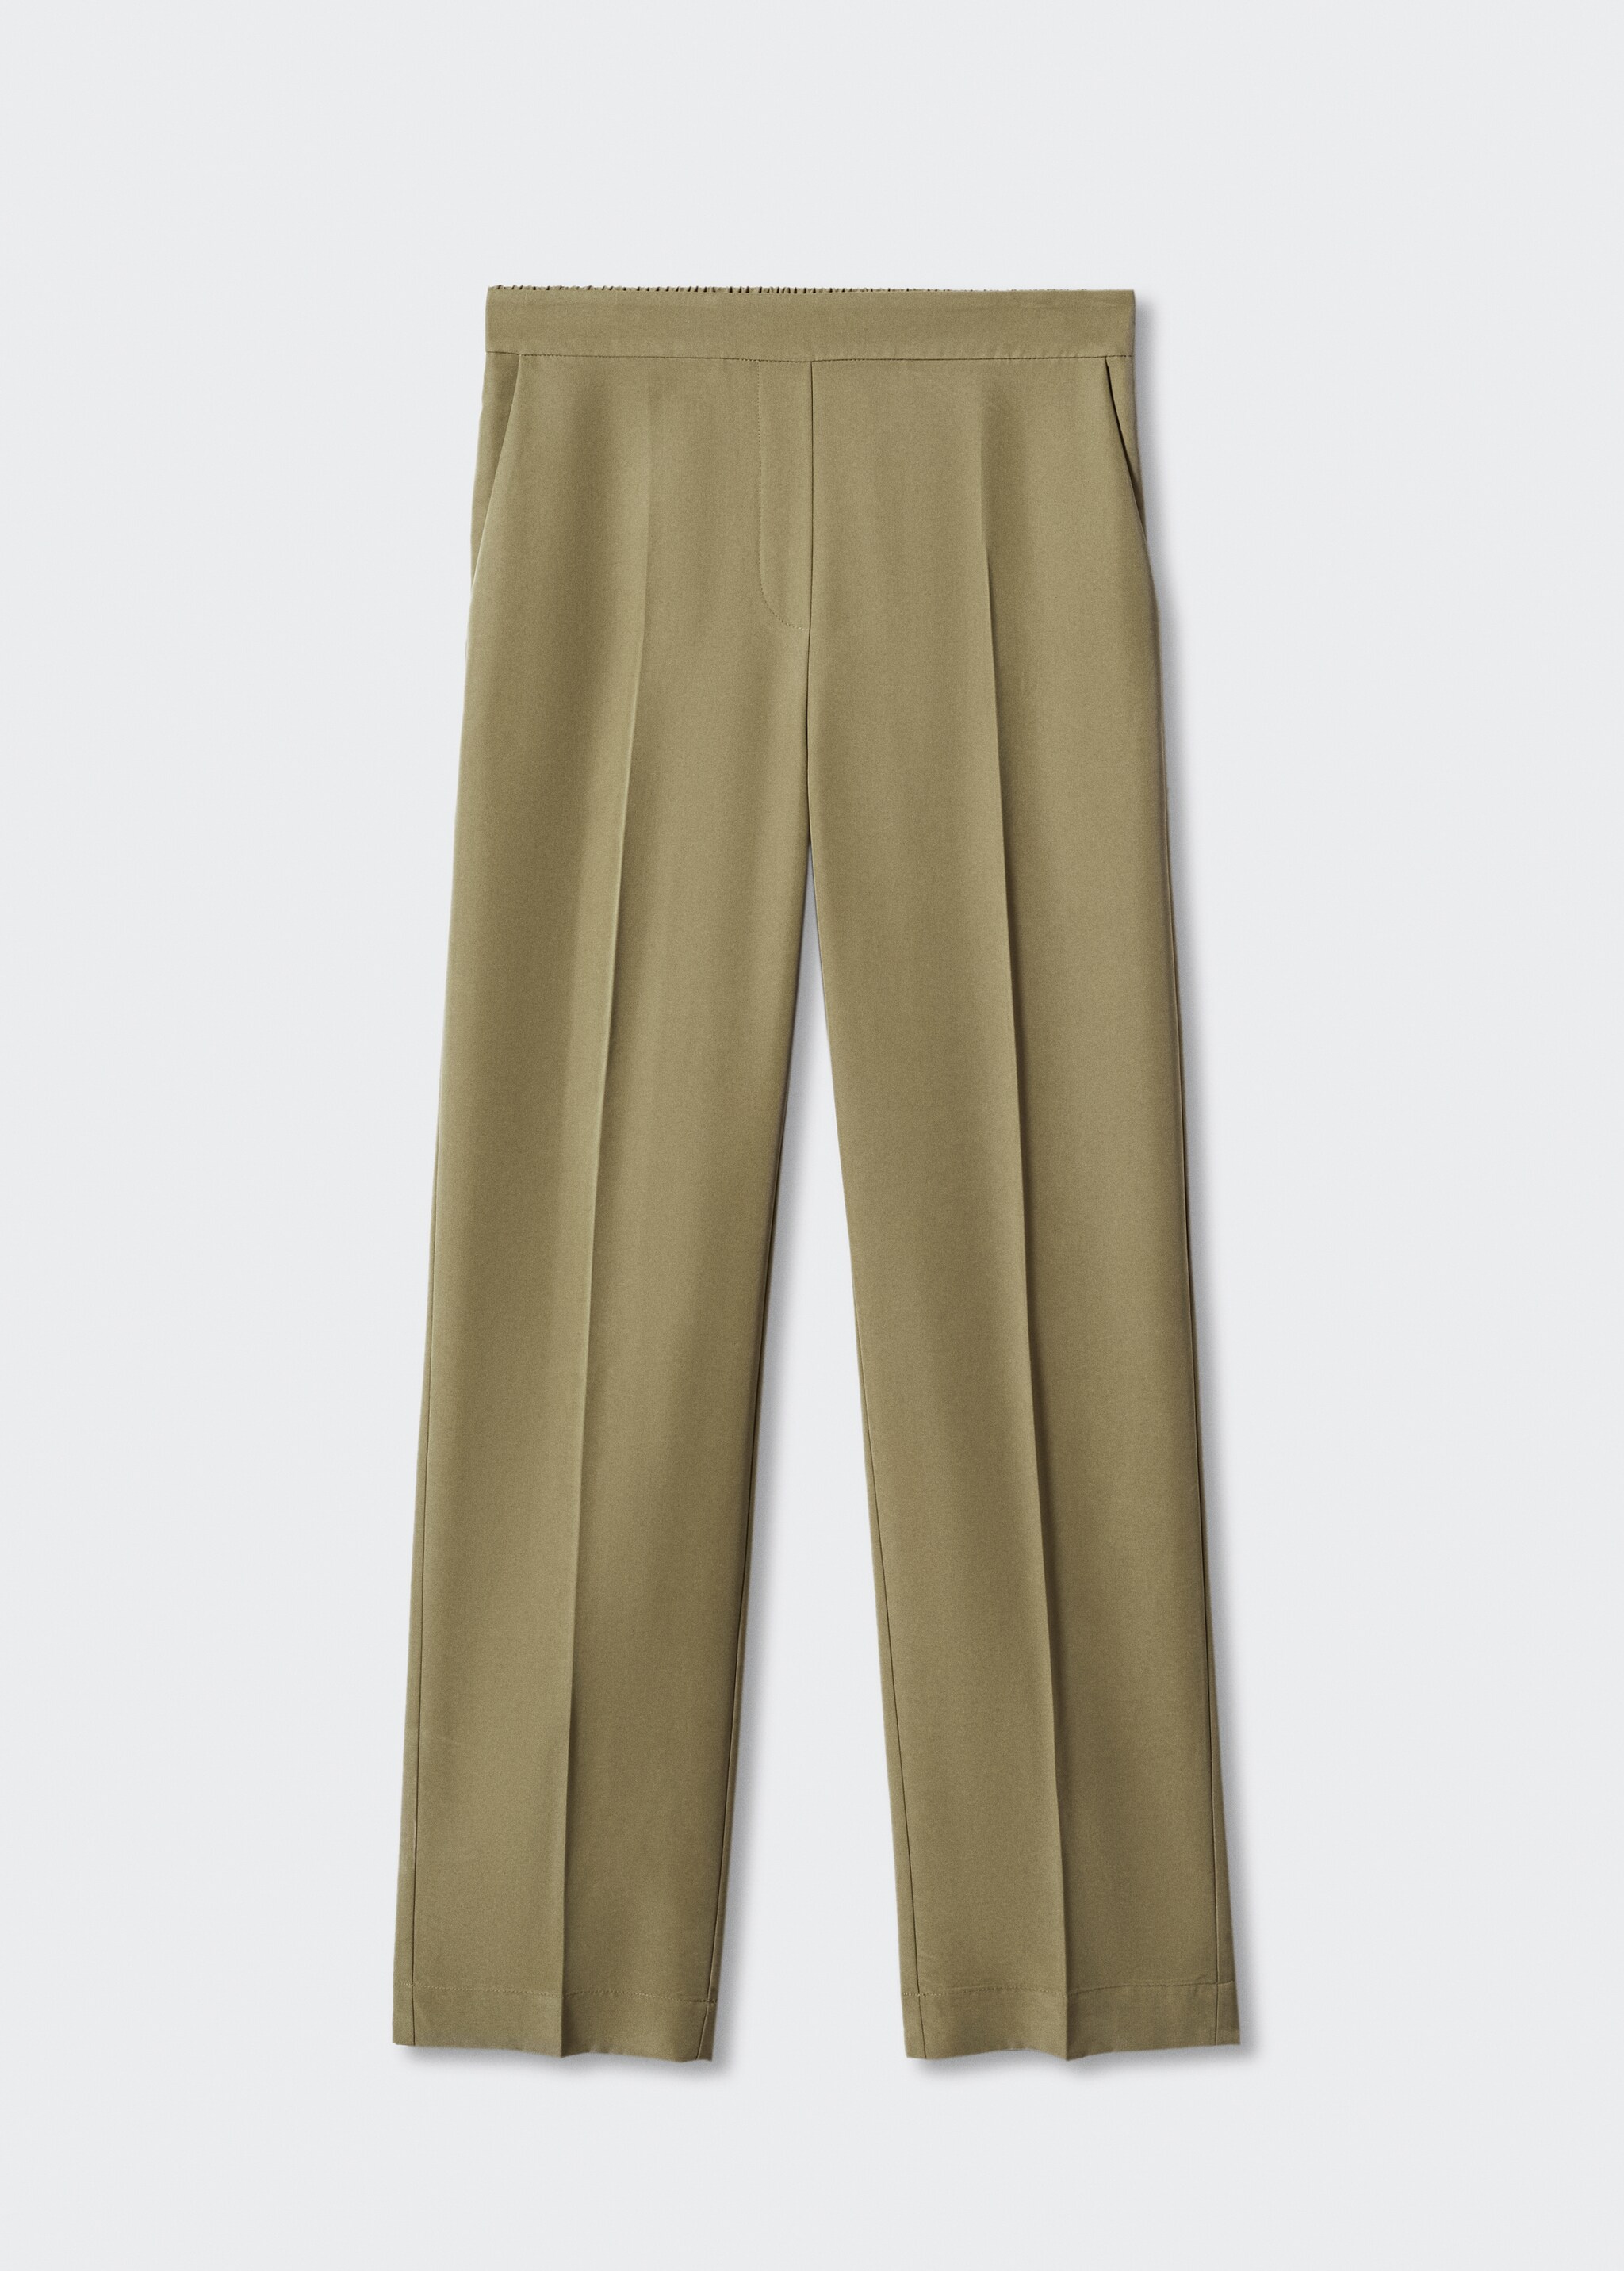 Modal suit trousers - Article without model